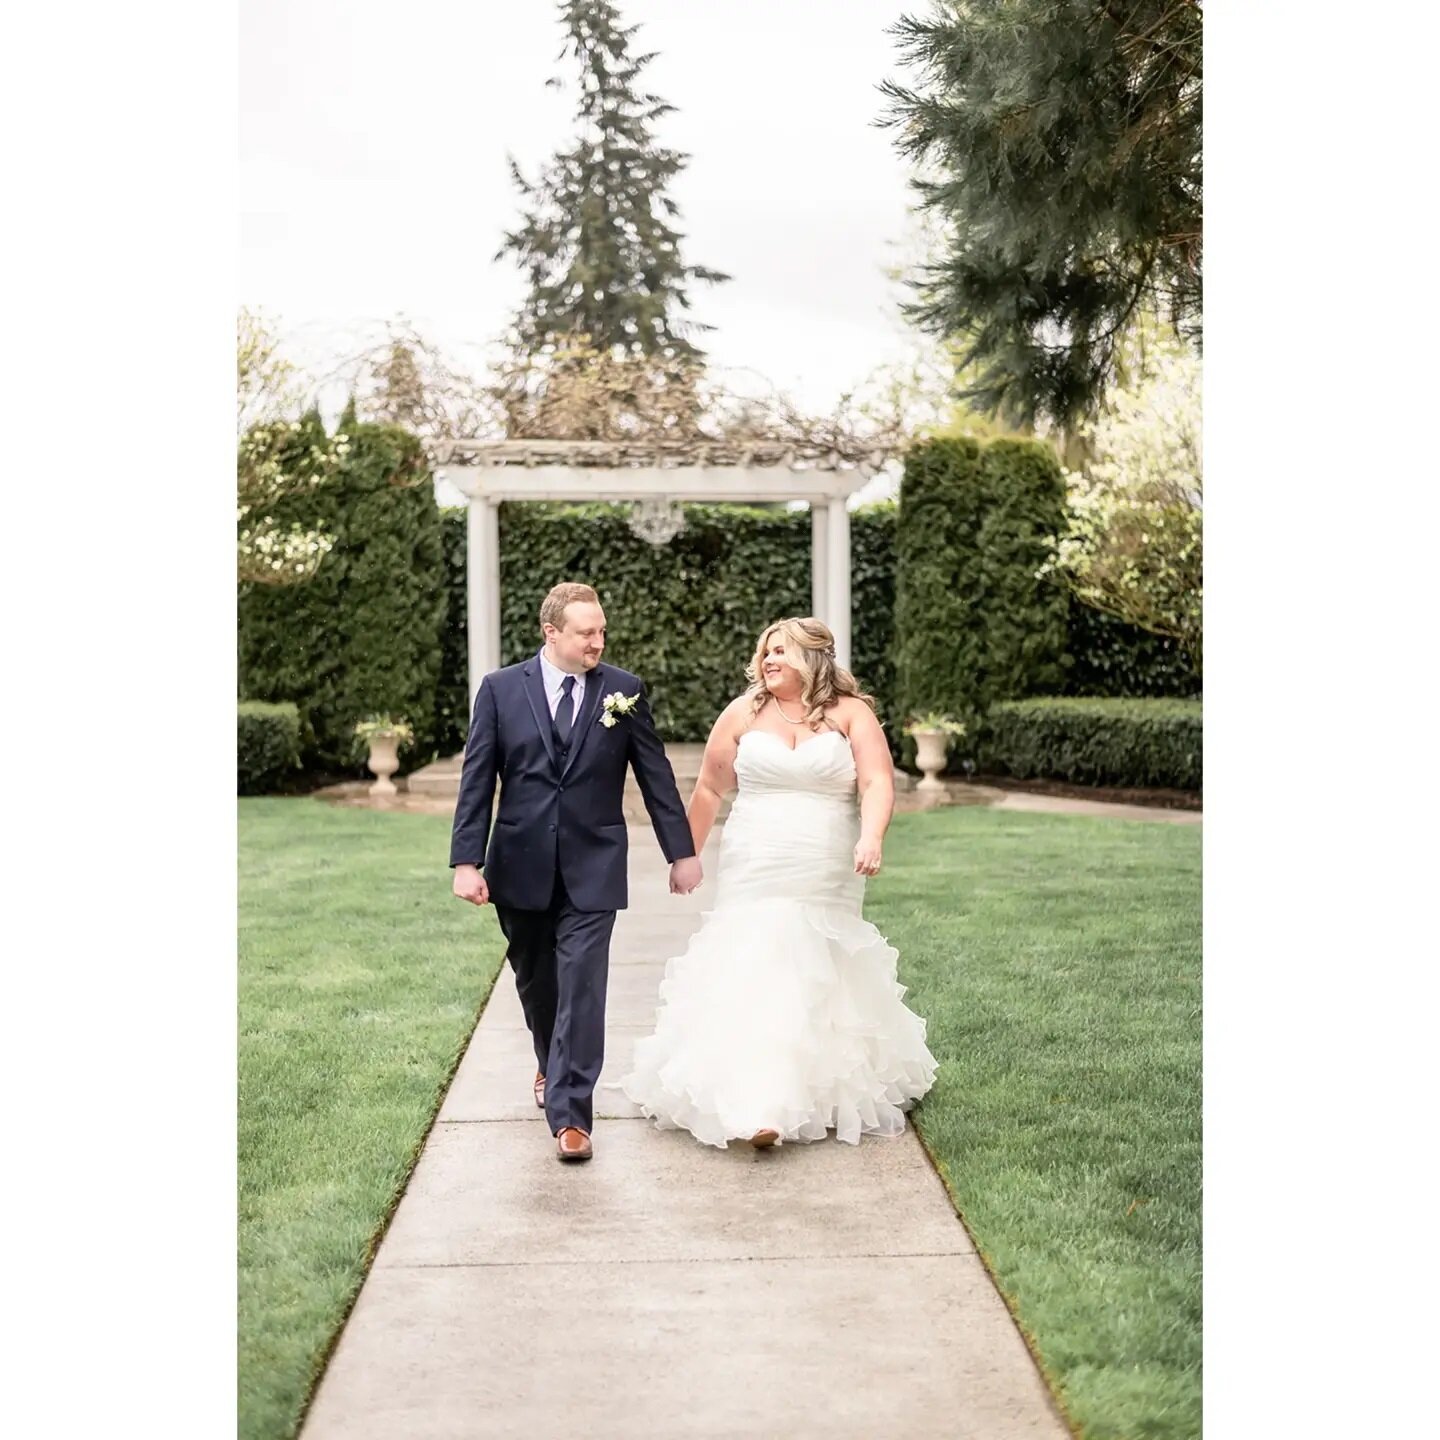 While this rainy April wedding wasn't exactly what Kerri and Kevin had in mind for their special day it was still incredibly stunning with the lush, vibrant greens and the smell of spring in the air. We even got a few breaks in the drizzle that we co